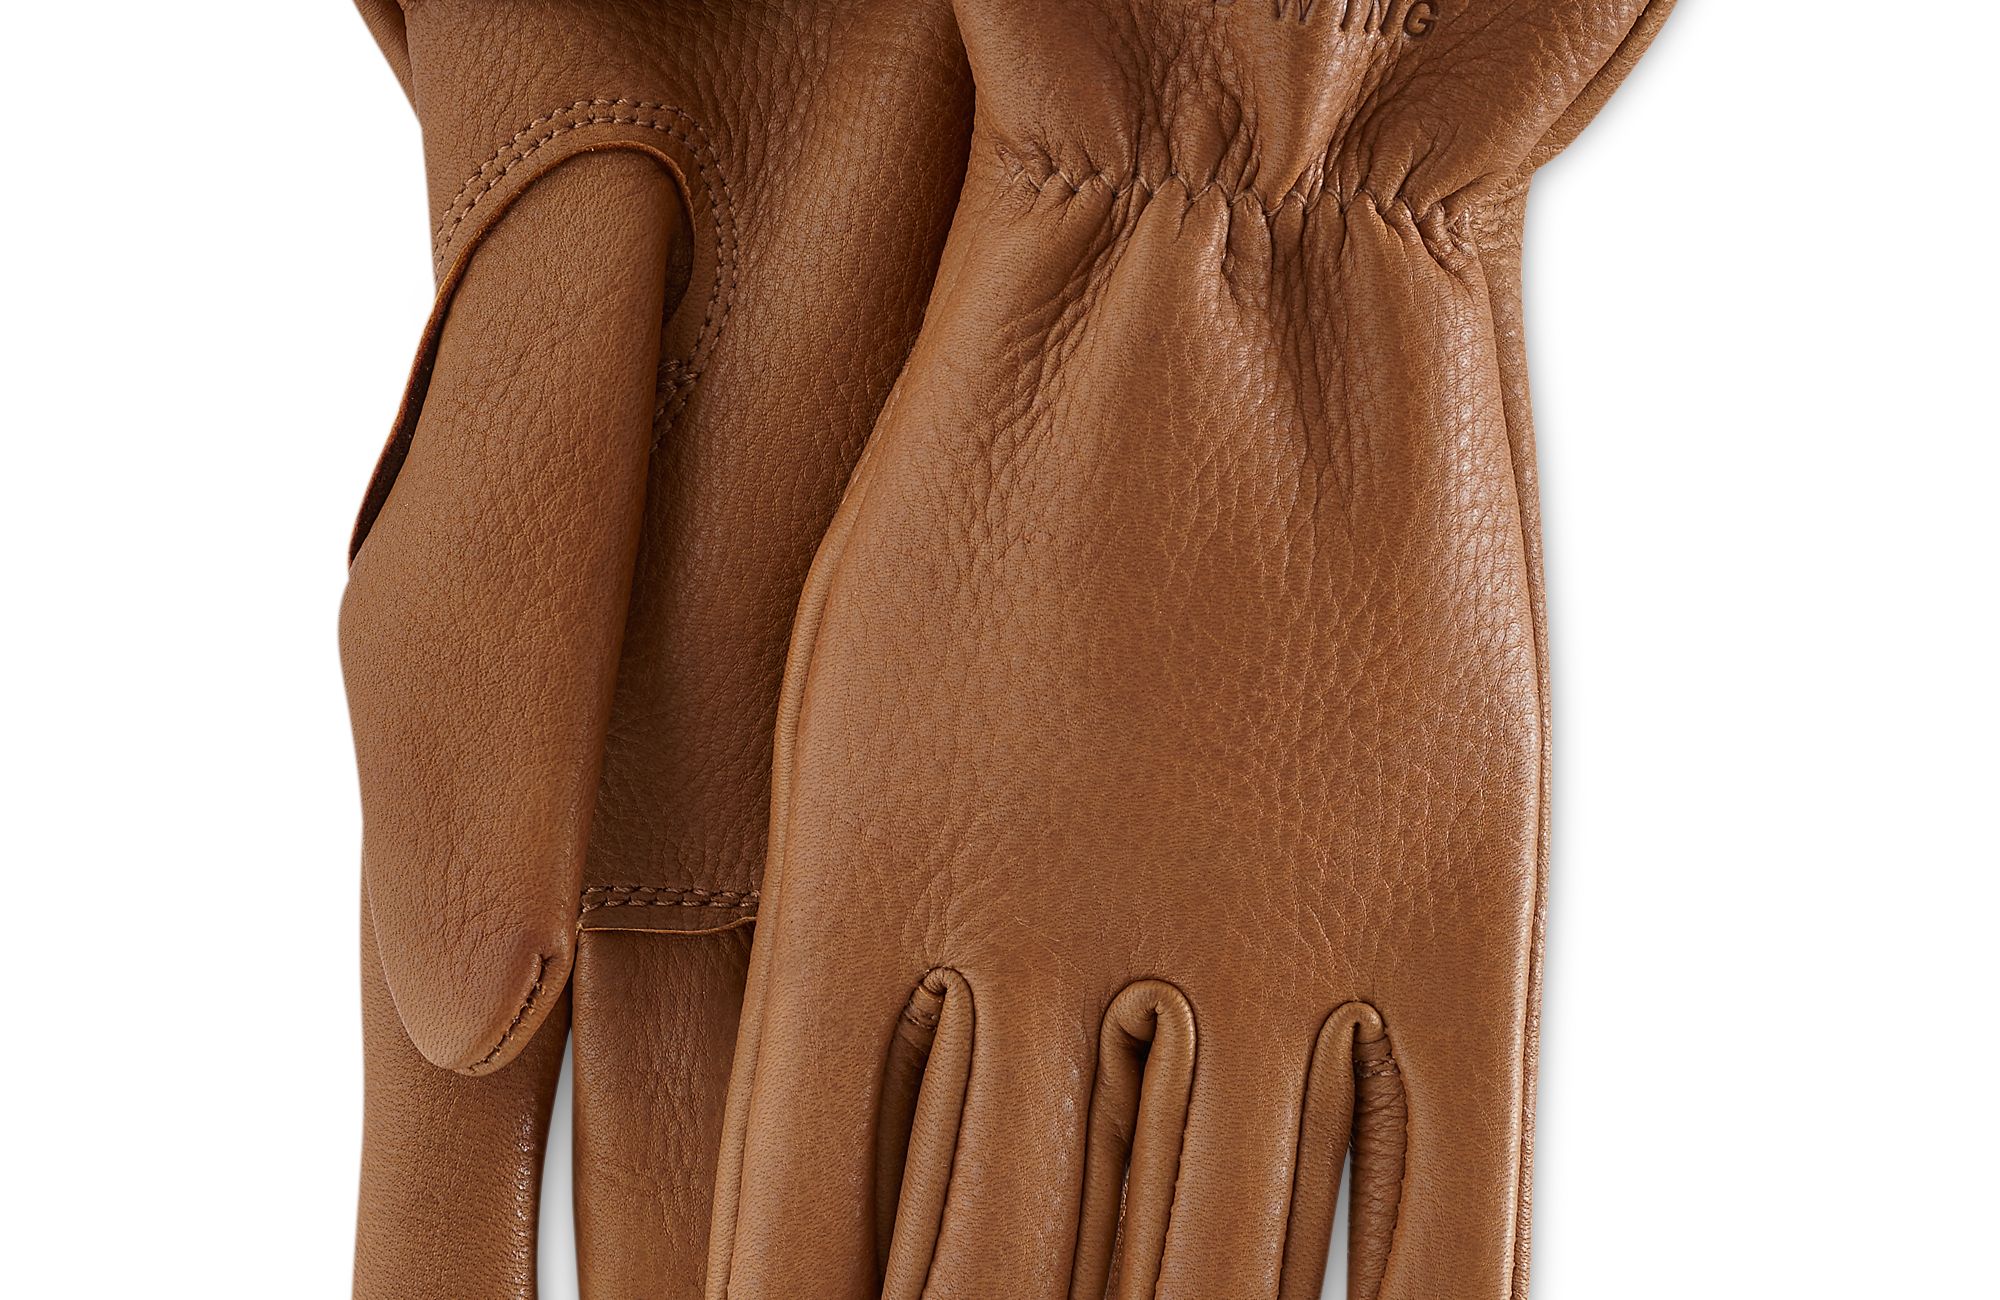 Lined Buckskin Leather Glove | Red Wing